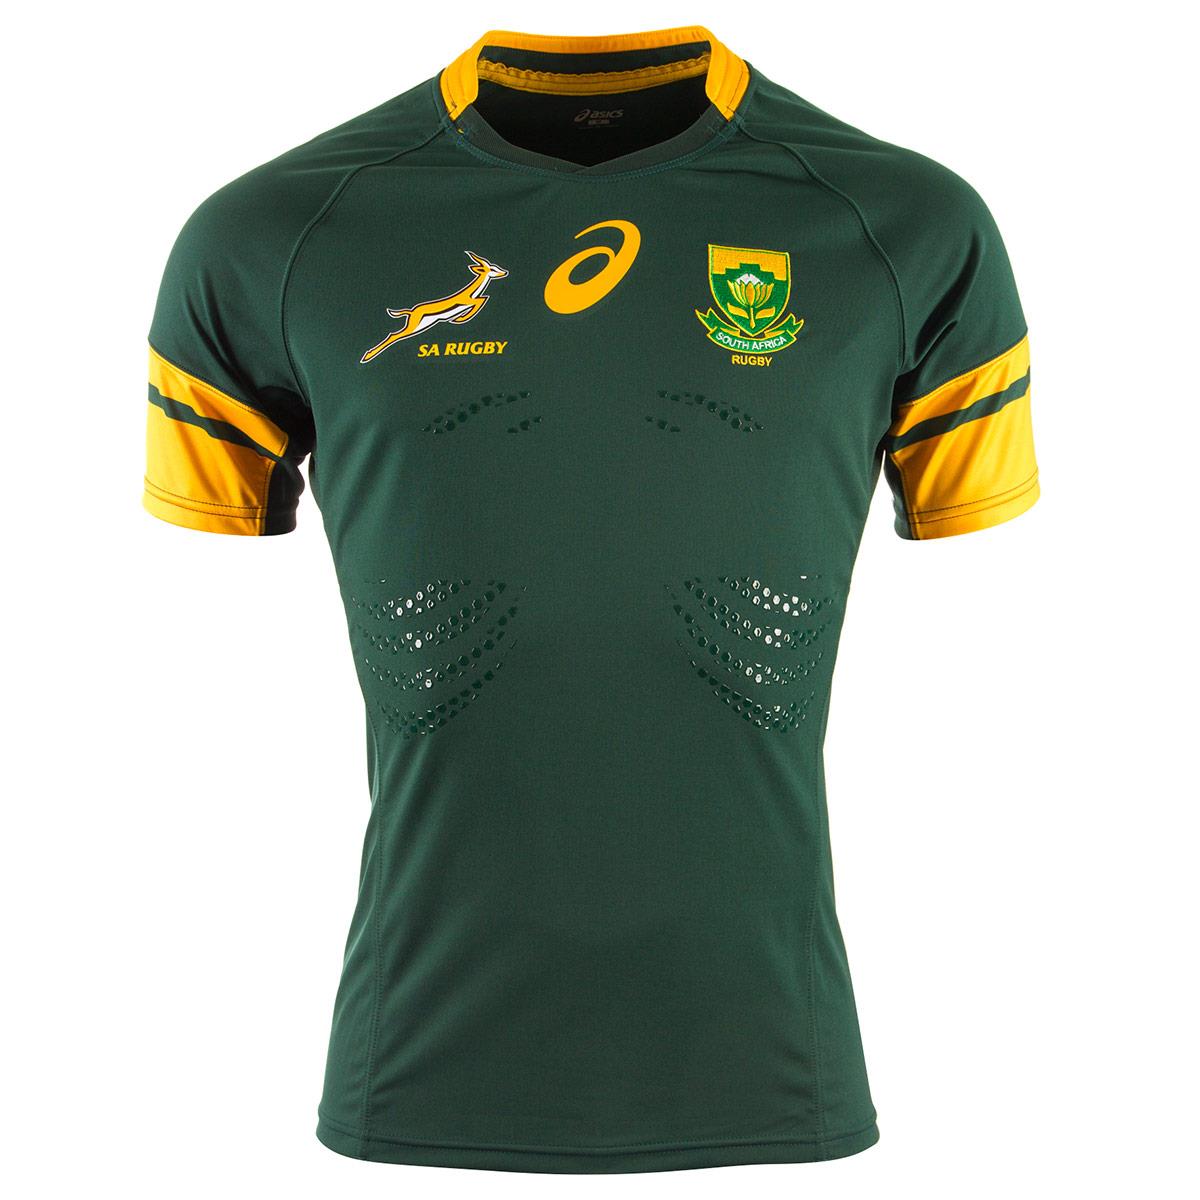 Top 30 cheapest South africa rugby shirt UK prices - best deals on ...